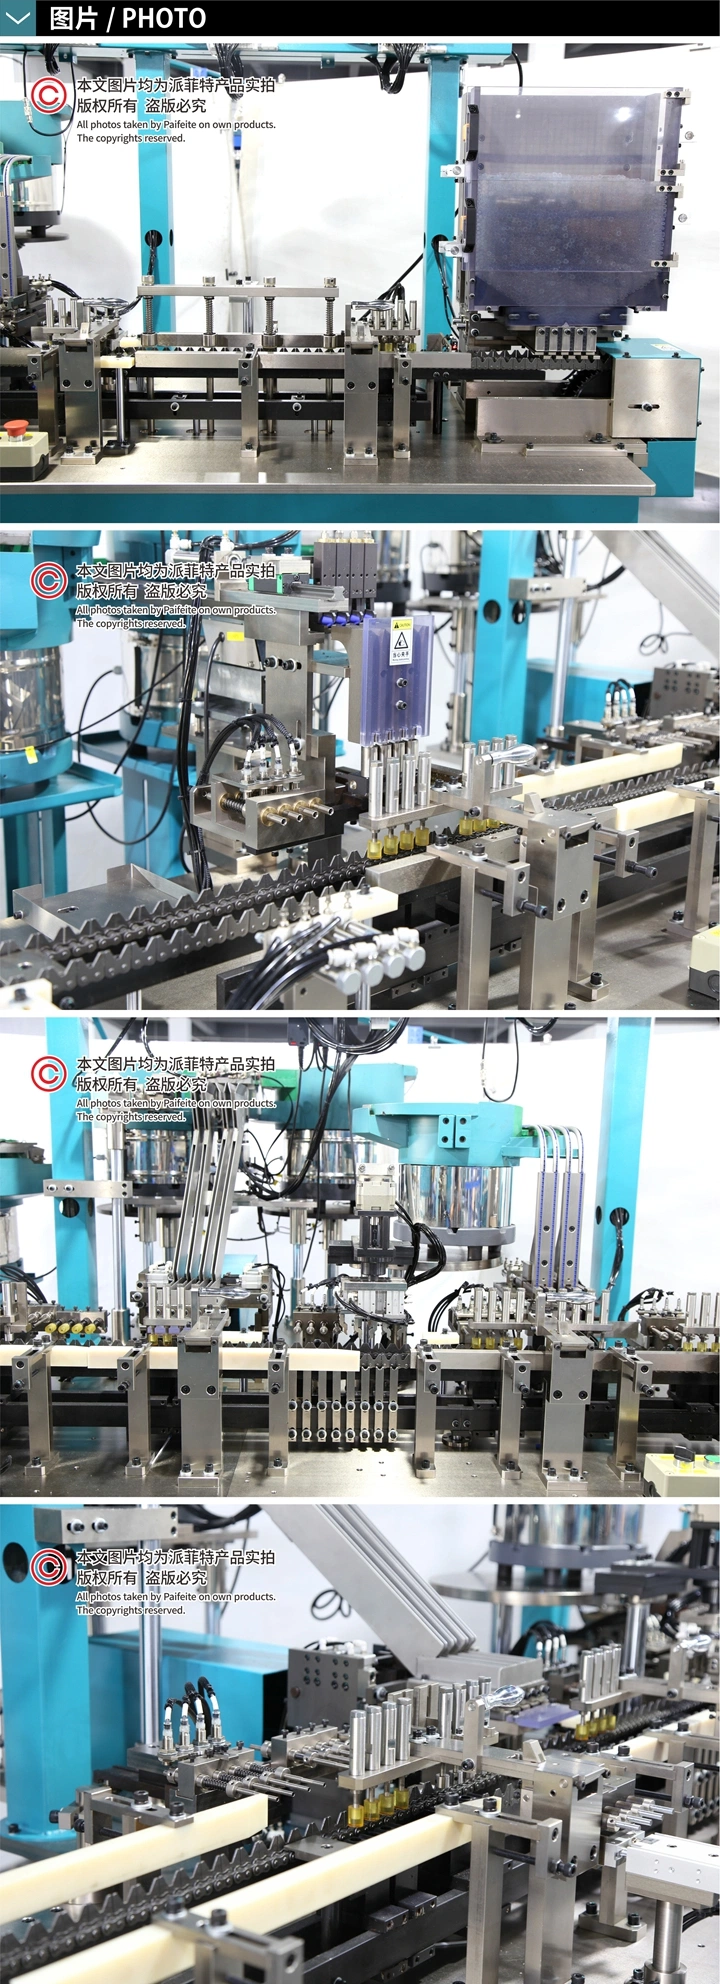 Automatic Ball Pen Assembly Machine 4 up Capacity 8400 Pieces Per Hour